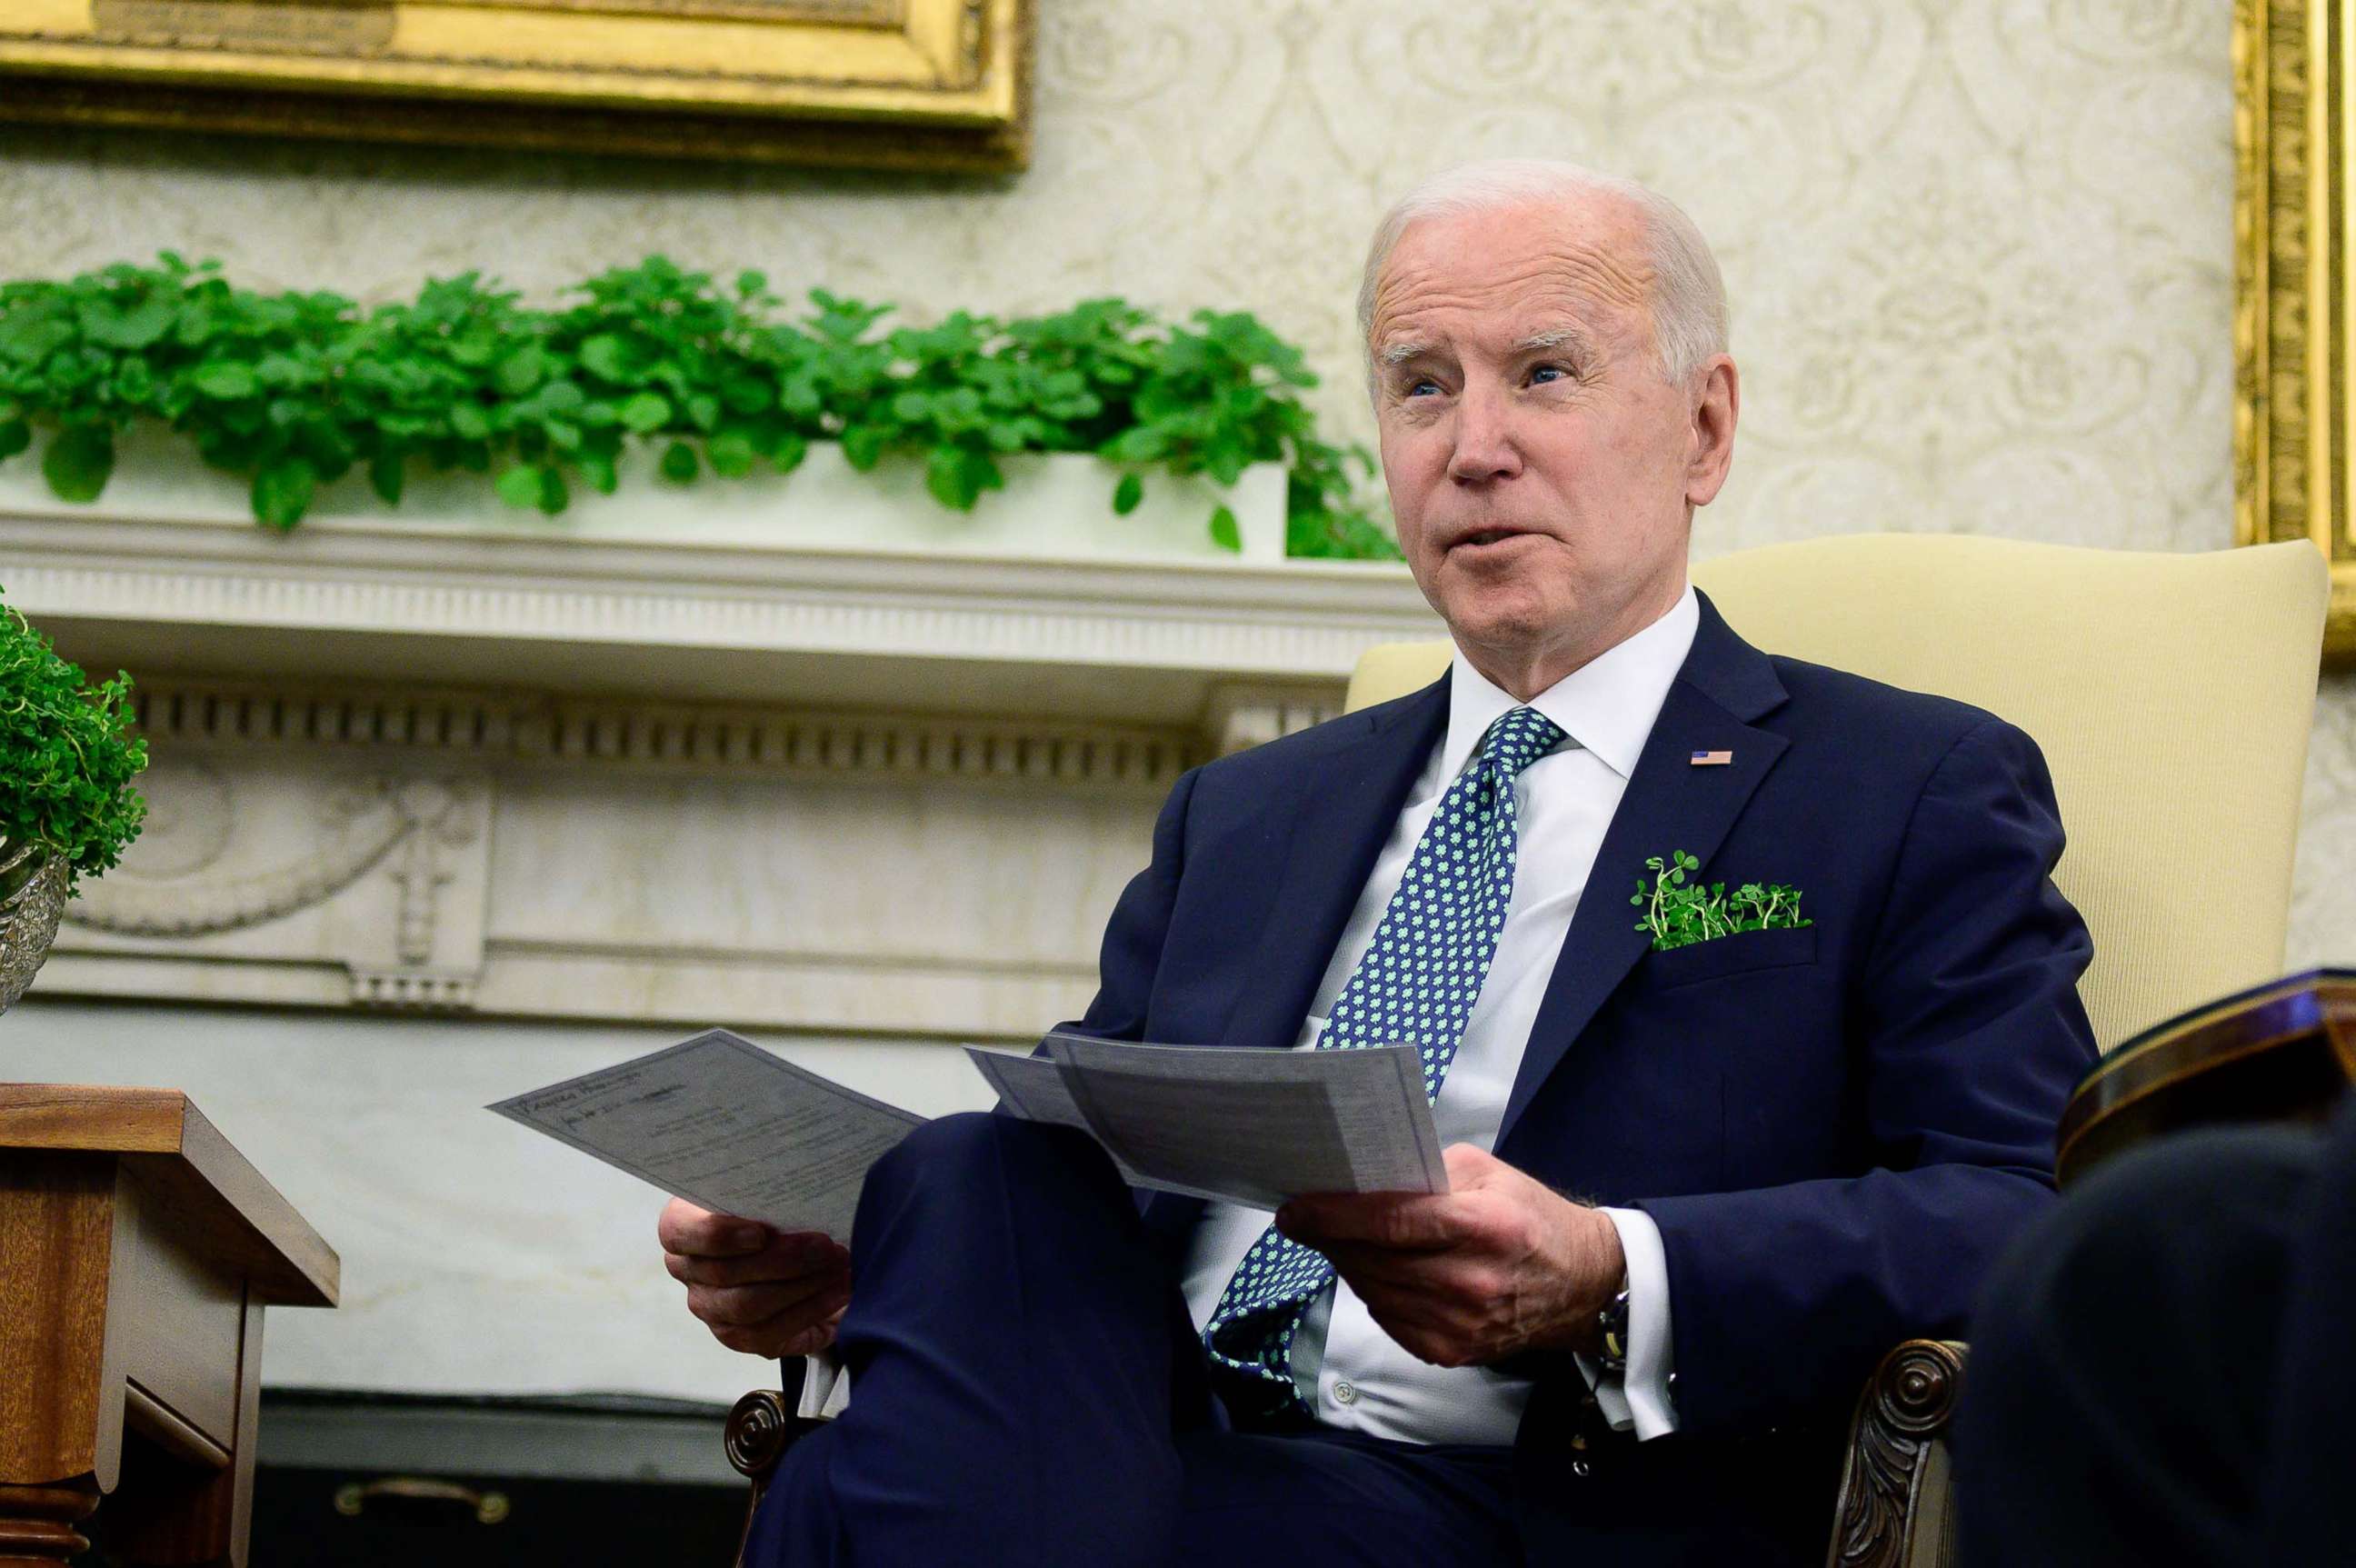 PHOTO: President Joe Biden speaks during a virtual meeting with Irish Prime Minister (Taoiseach) Micheal Martin in the Oval Office of the White House on March 17, 2021.